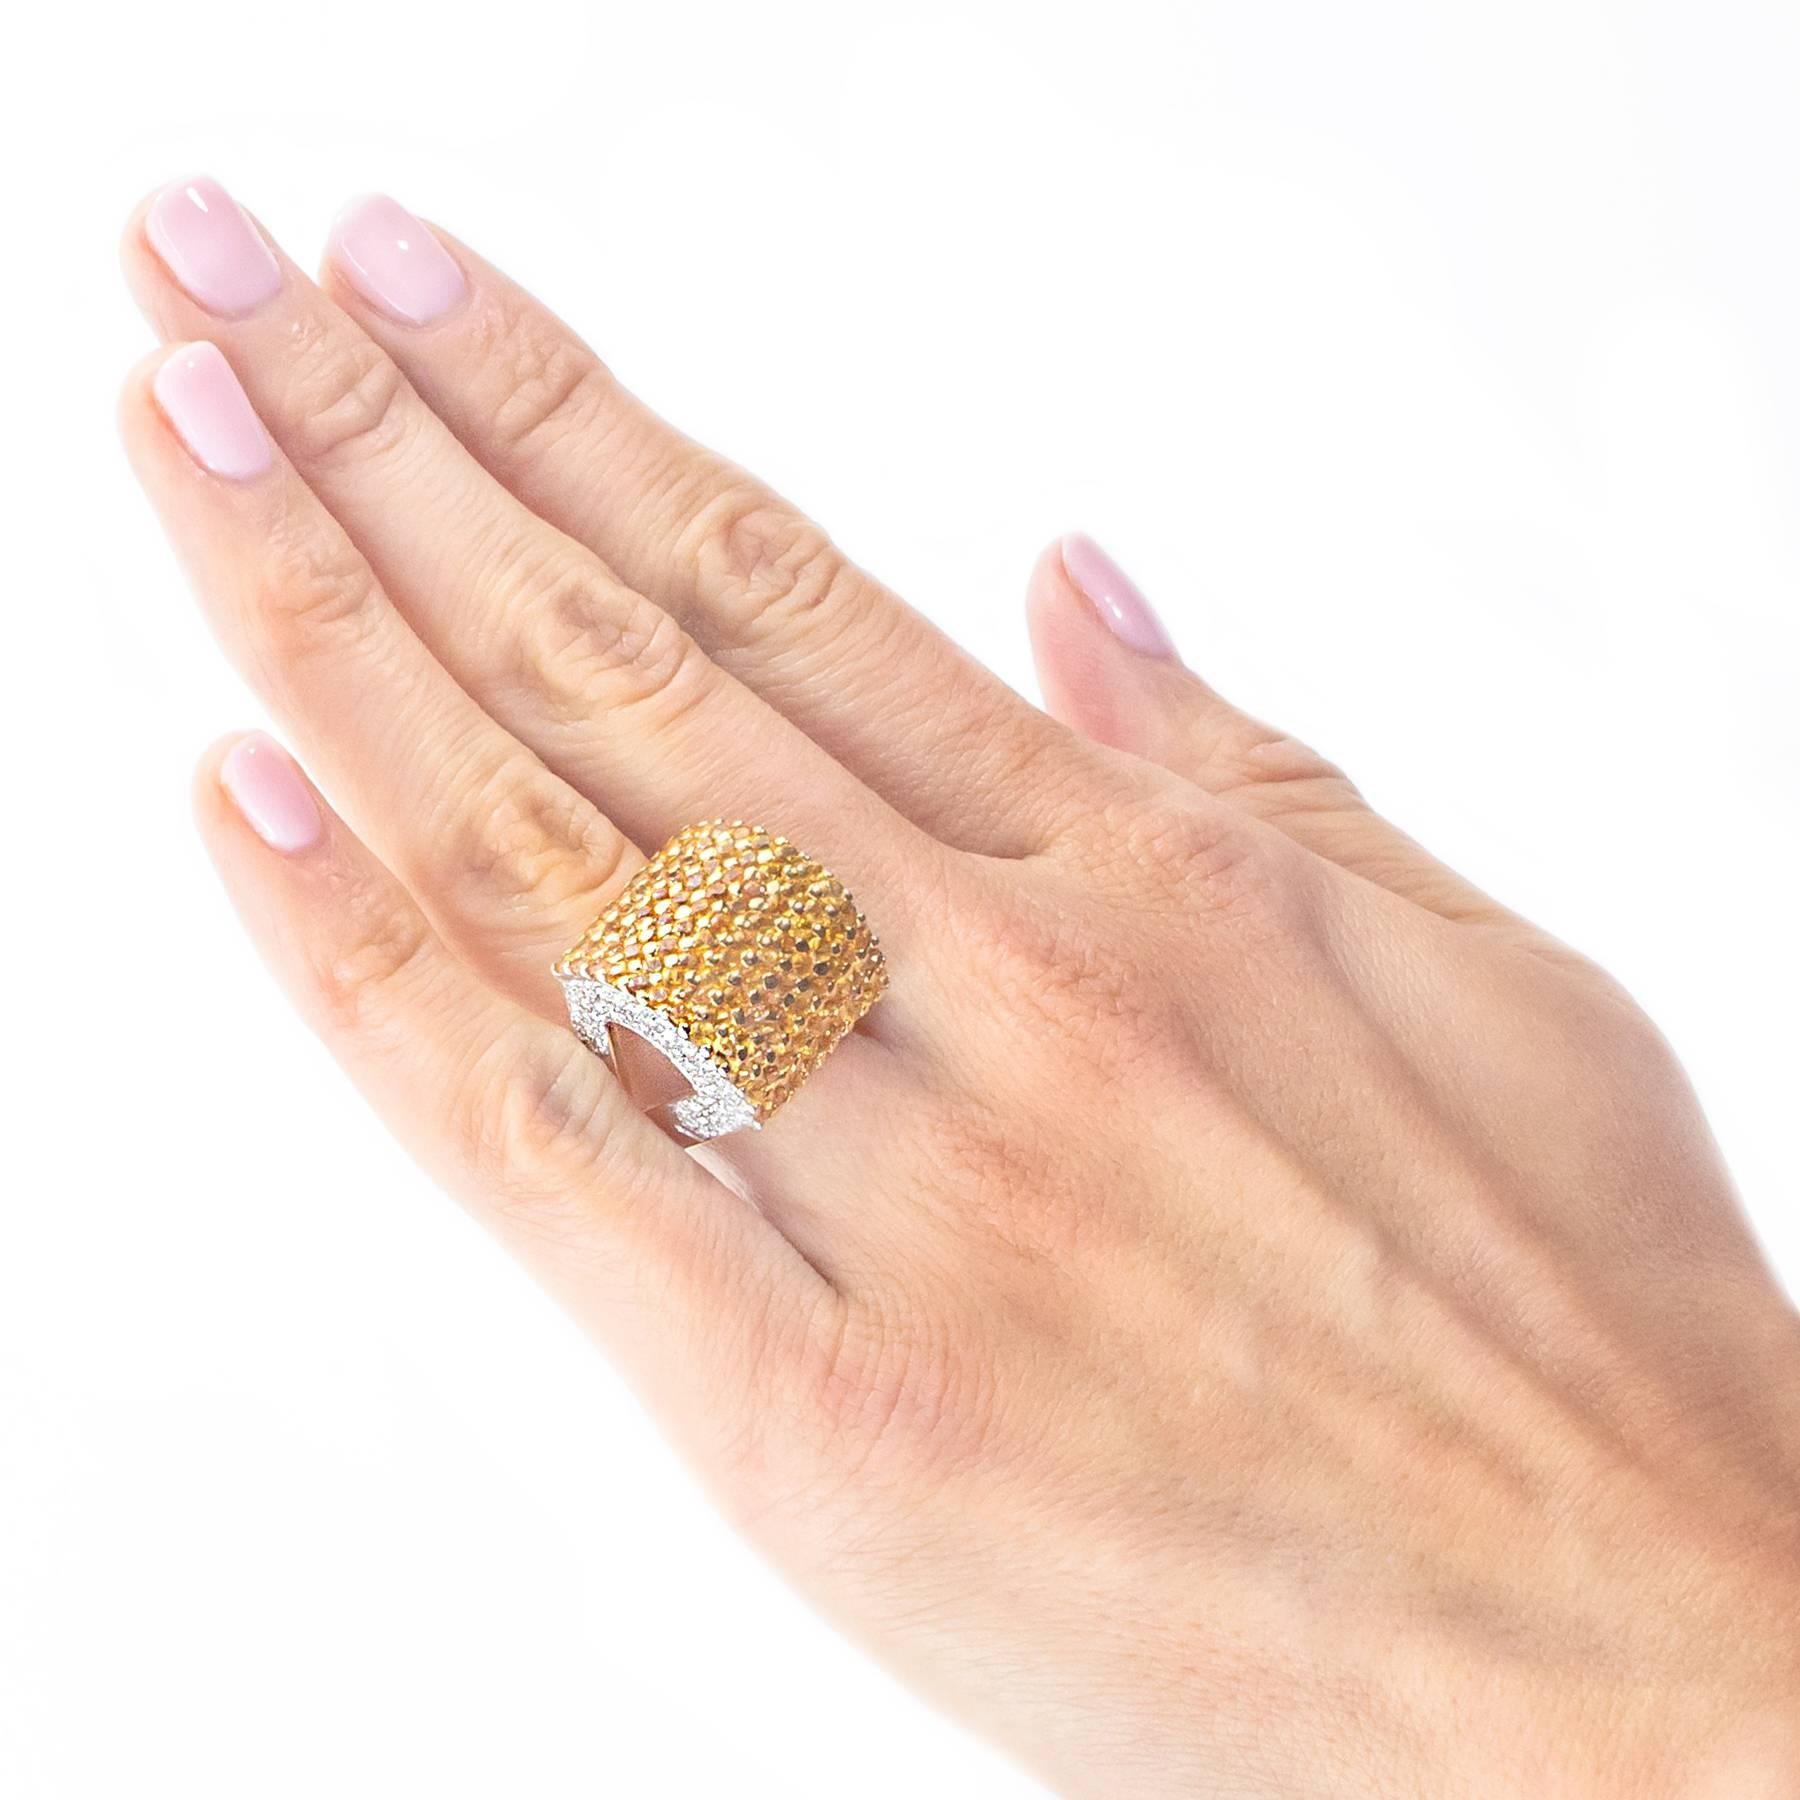 A dynamic dome shaped ring is pave set with 108 Yellow Sapphires/Corundums totalling approximately 4.33 carats. The sides of the dome contain 84 round, brilliant cut Diamonds weighing .67 carat.

The ring measures 18mm (approximately .75 inch) north